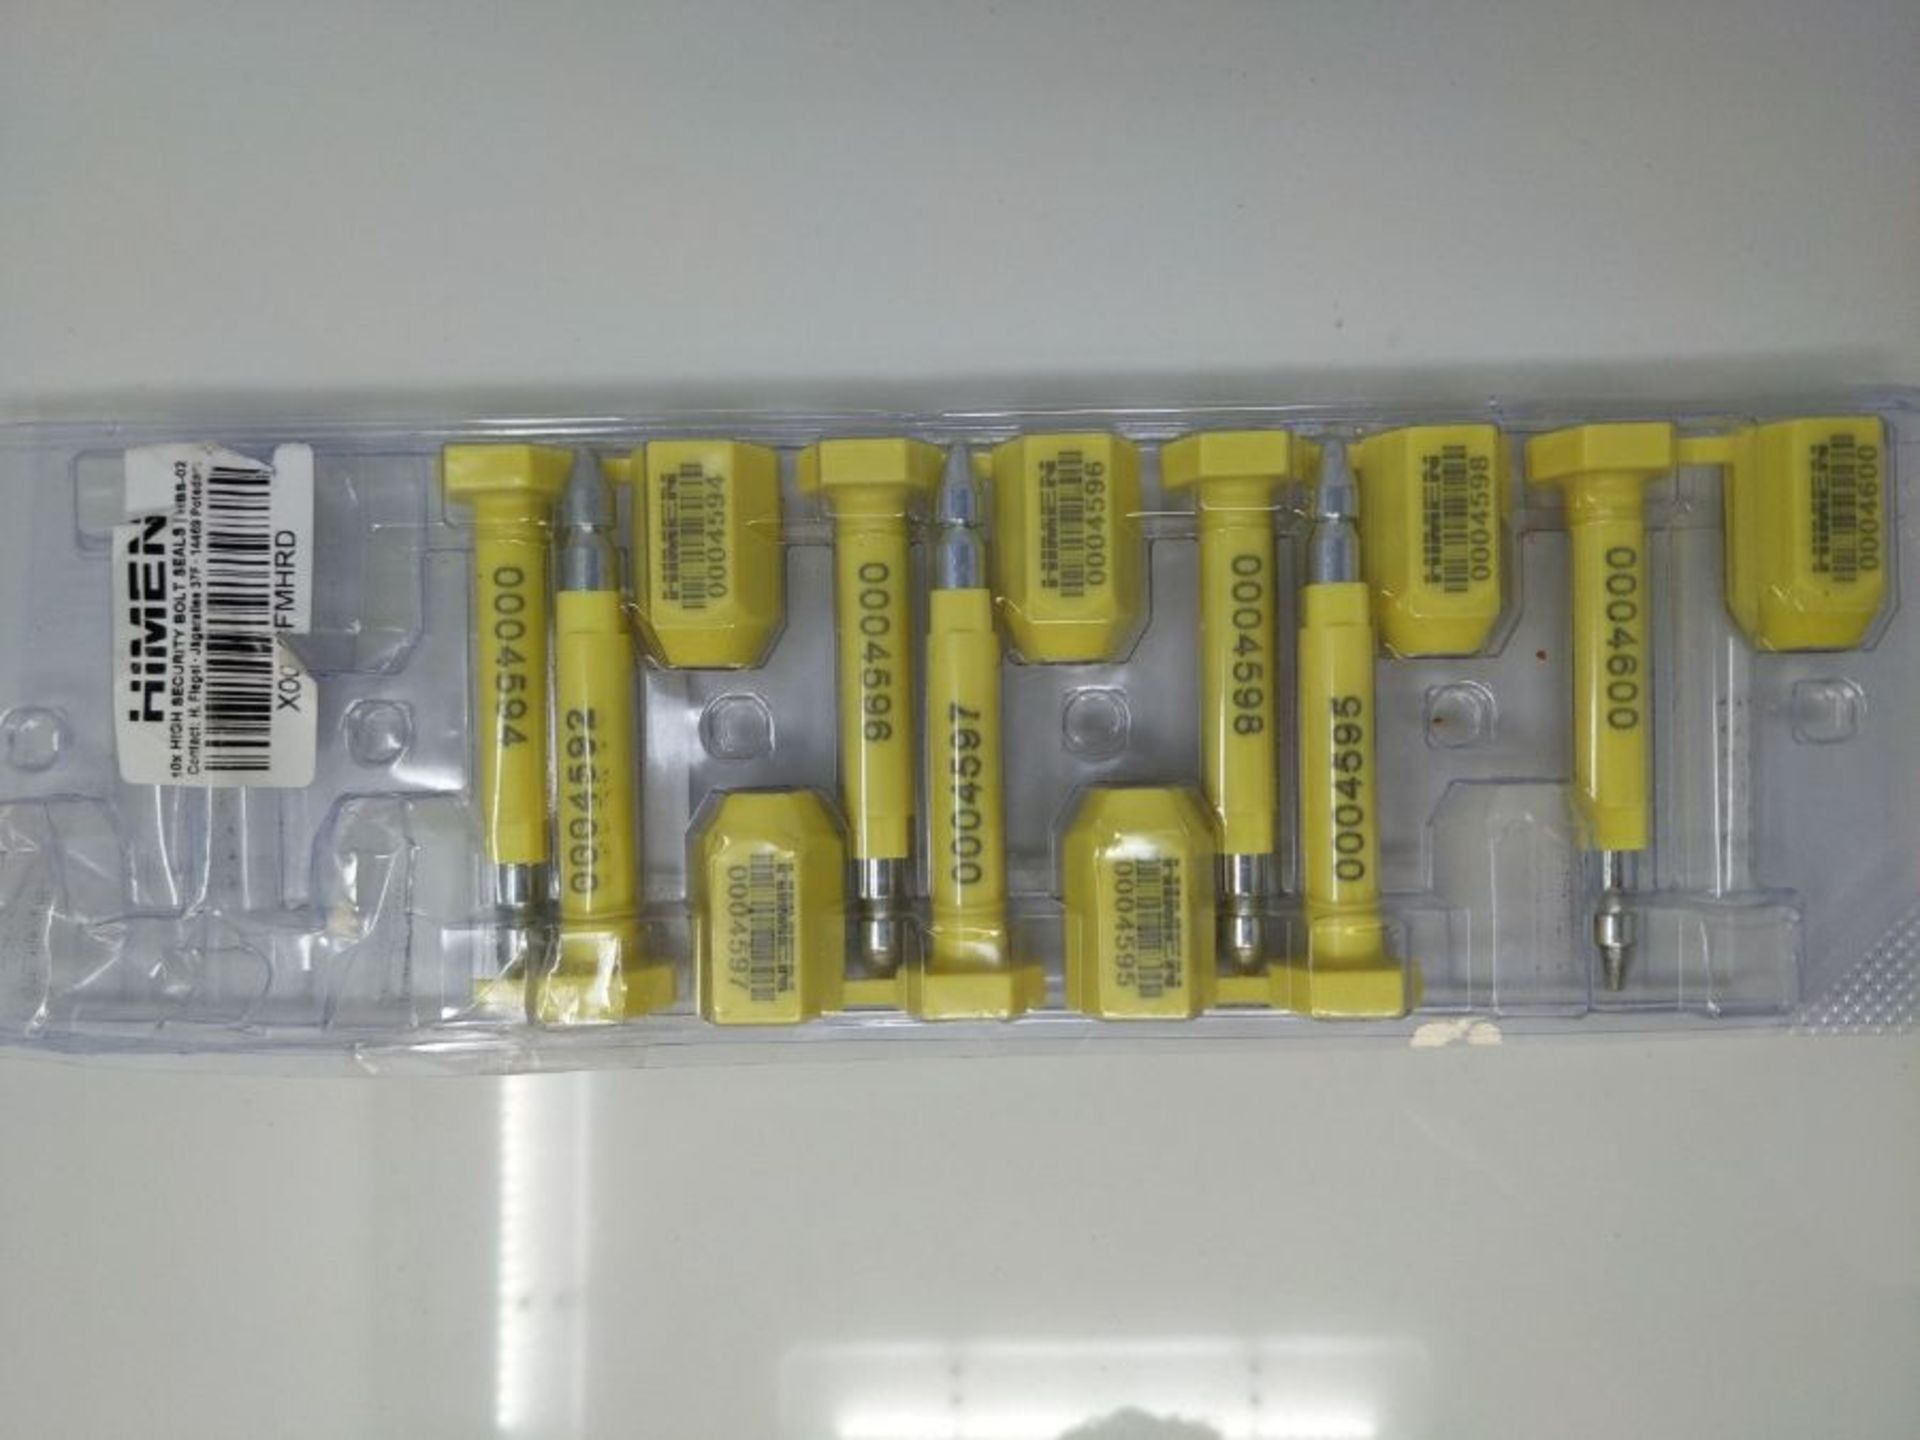 10x Bolt seals for containers from HIMEN | ISO 17712: 2013 | C-TPAT | consecutively nu - Image 2 of 3